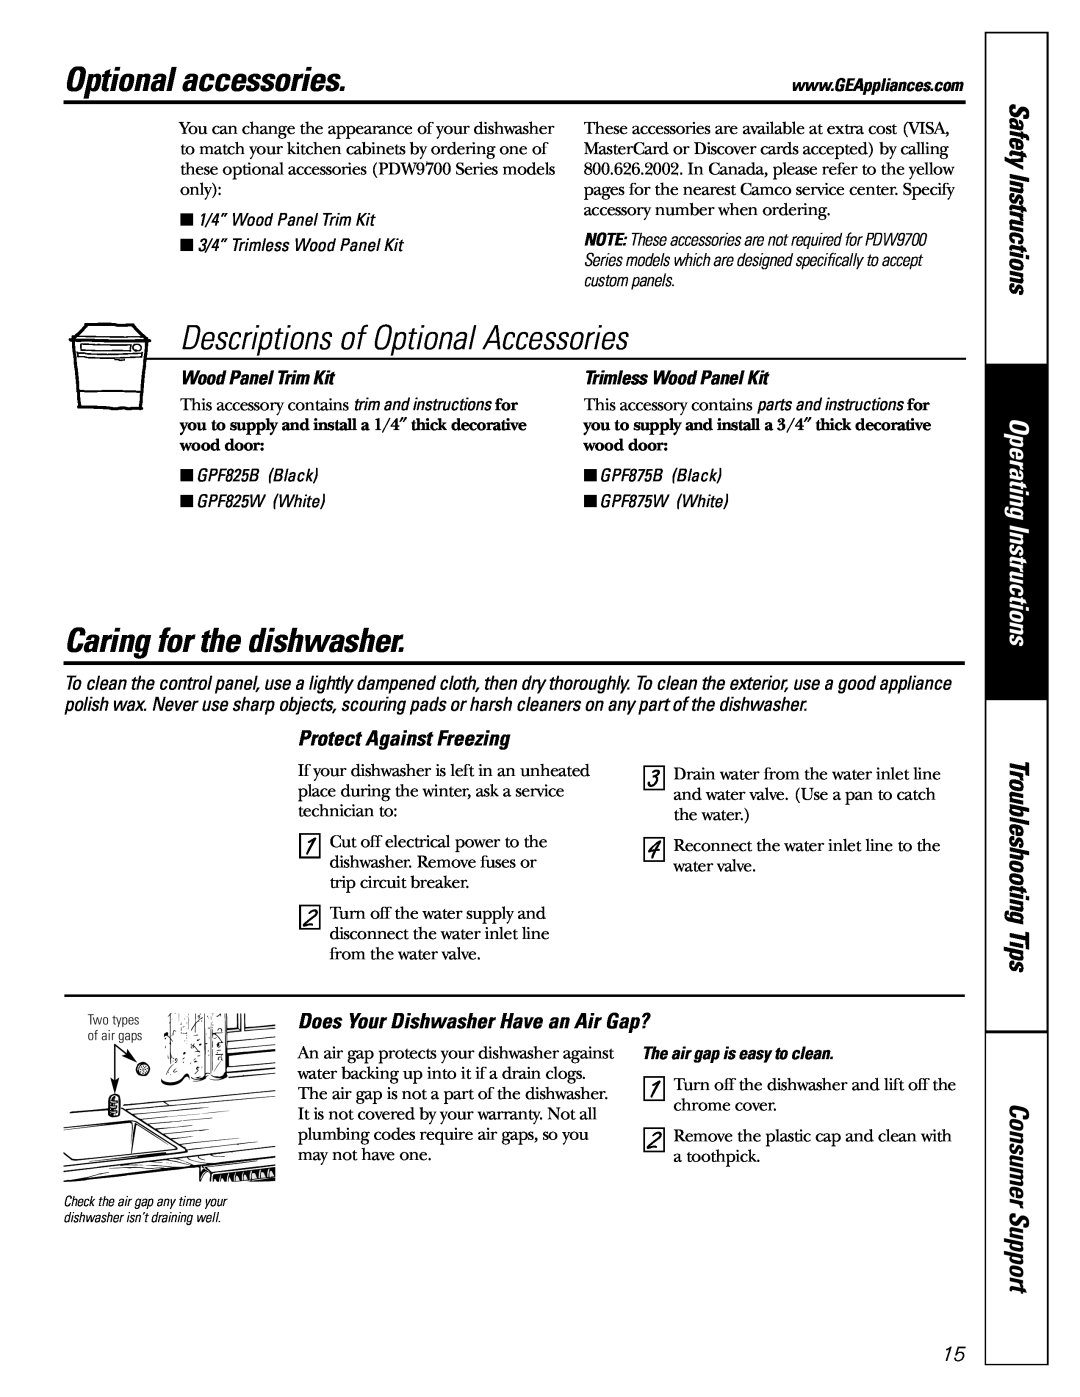 GE PDW9700 Optional accessories, Descriptions of Optional Accessories, Caring for the dishwasher, Safety Instructions 